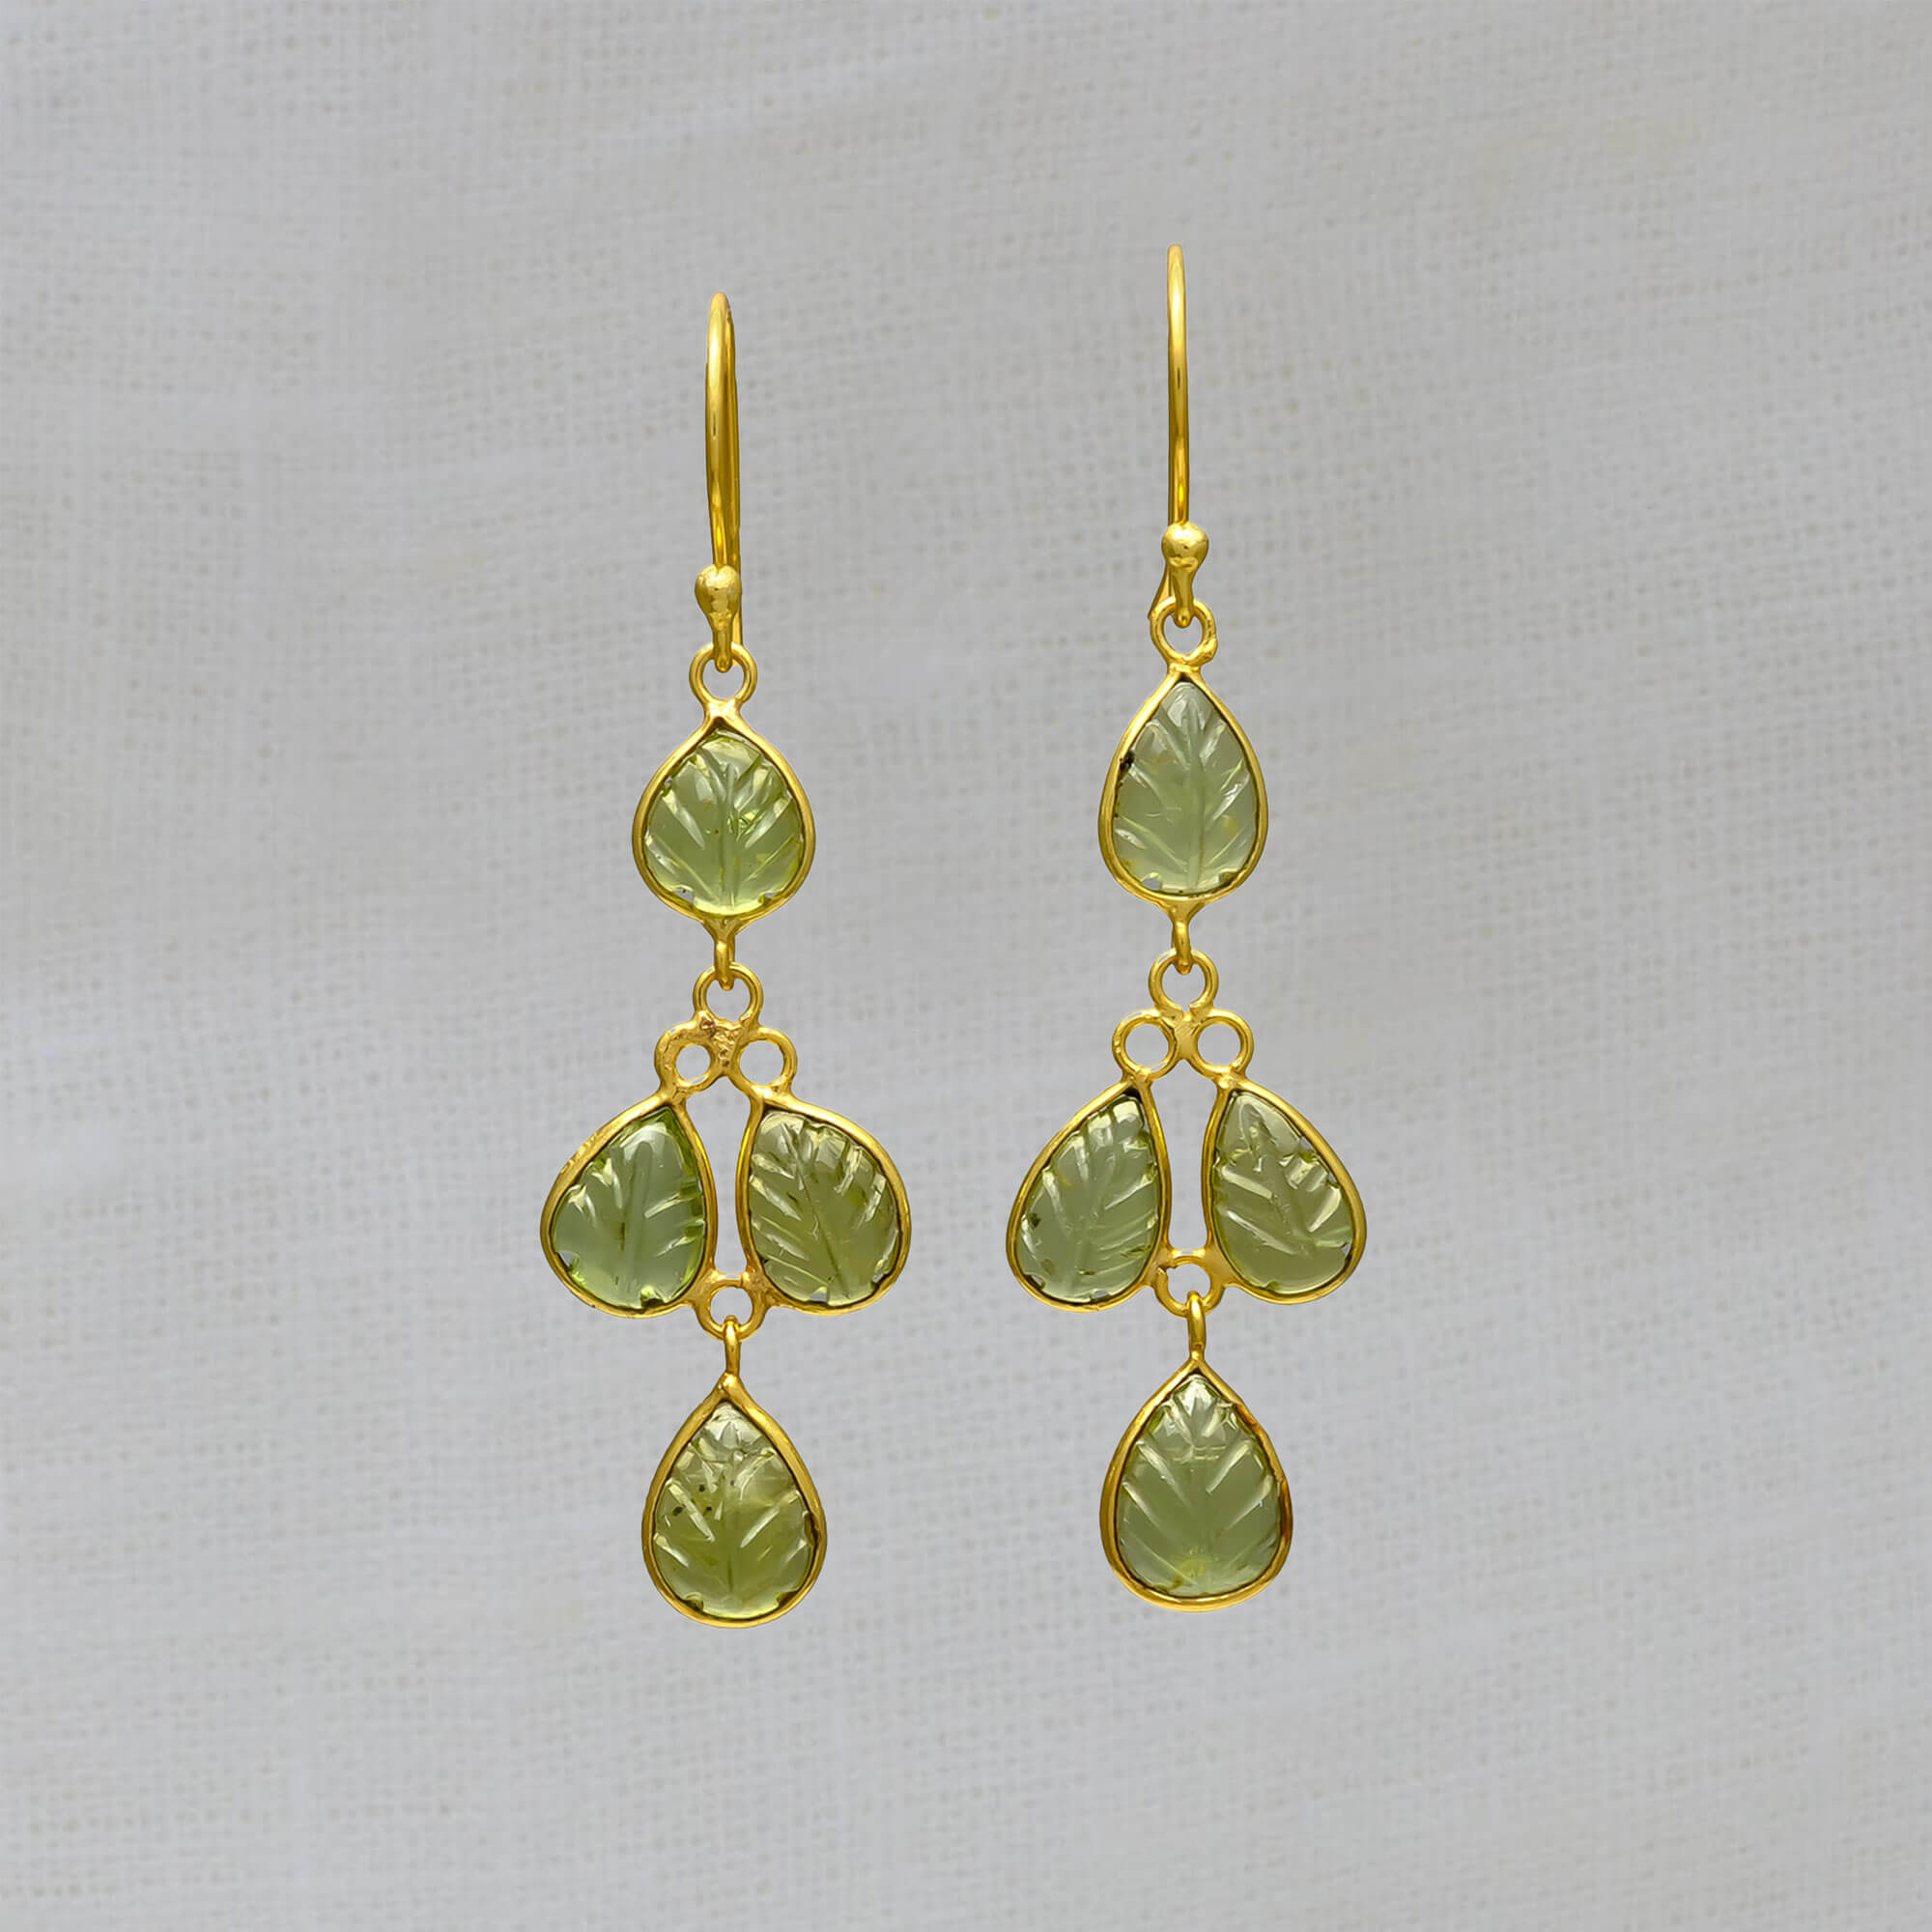 Drop earrings featuring 4 small leaf shaped carved peridot gemstones in a simple 18k gold vermeil setting, with a hook fitting